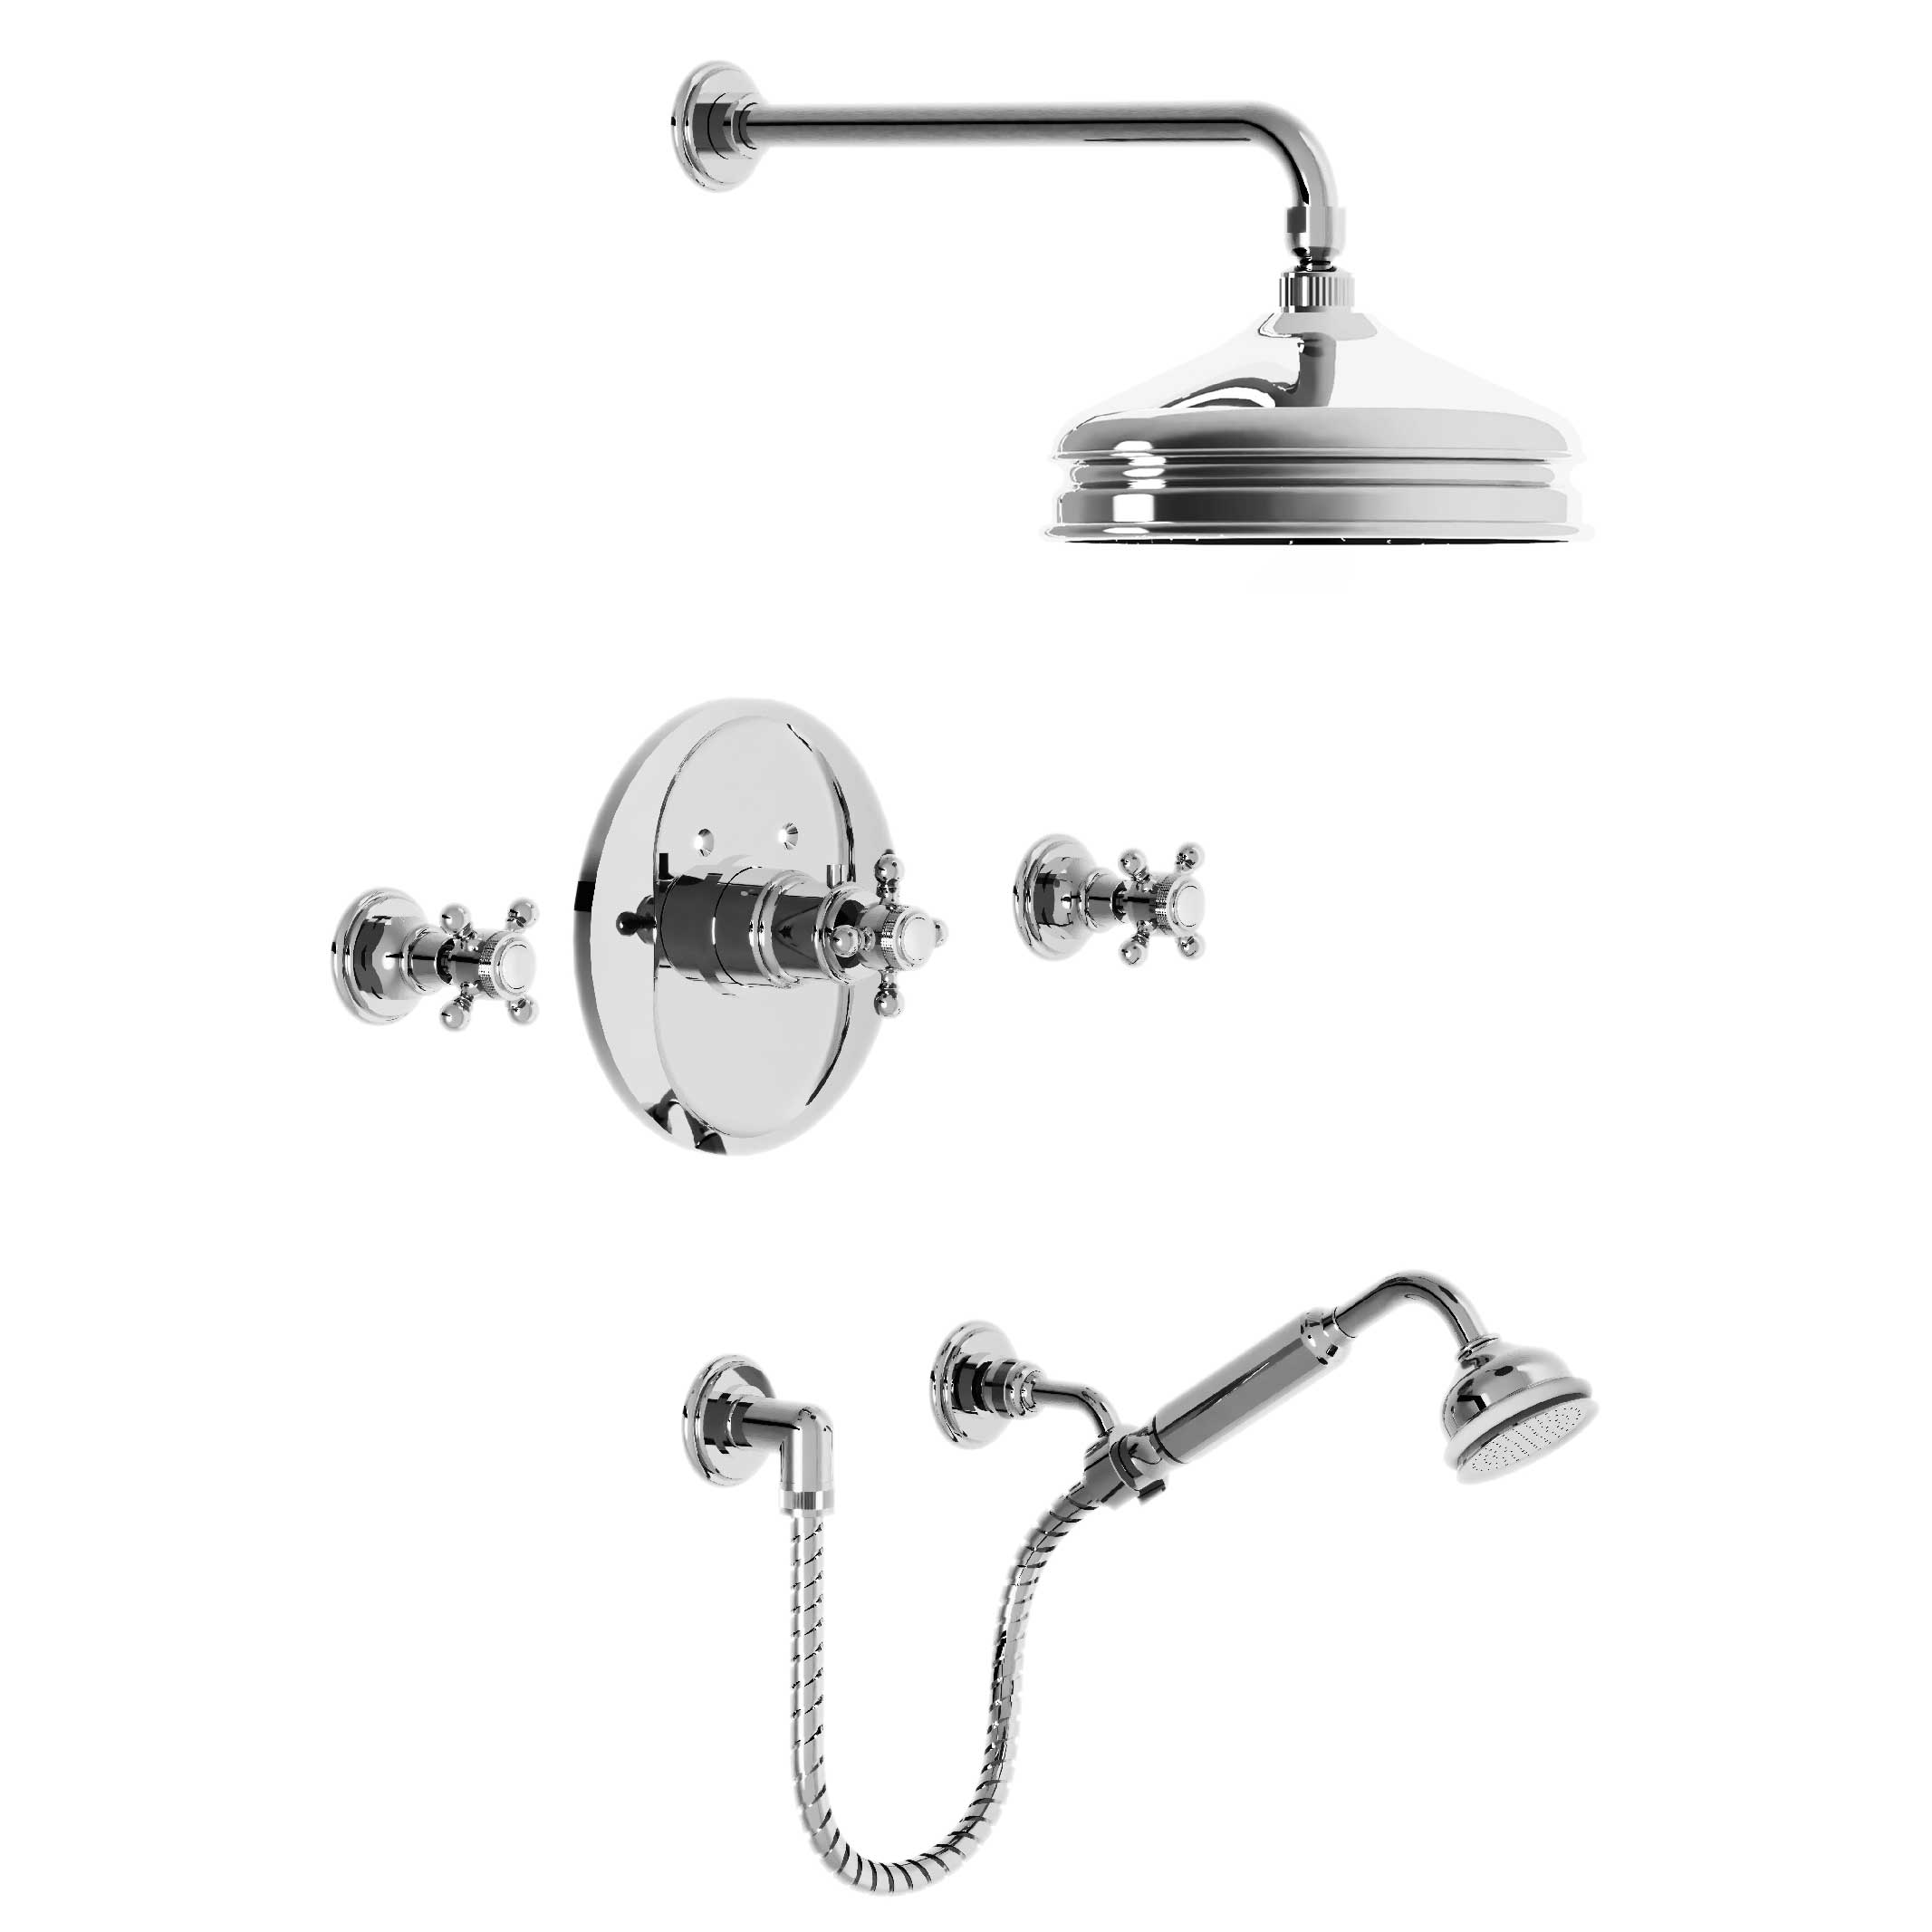 M30-2308T1 Thermostatic shower mixer package